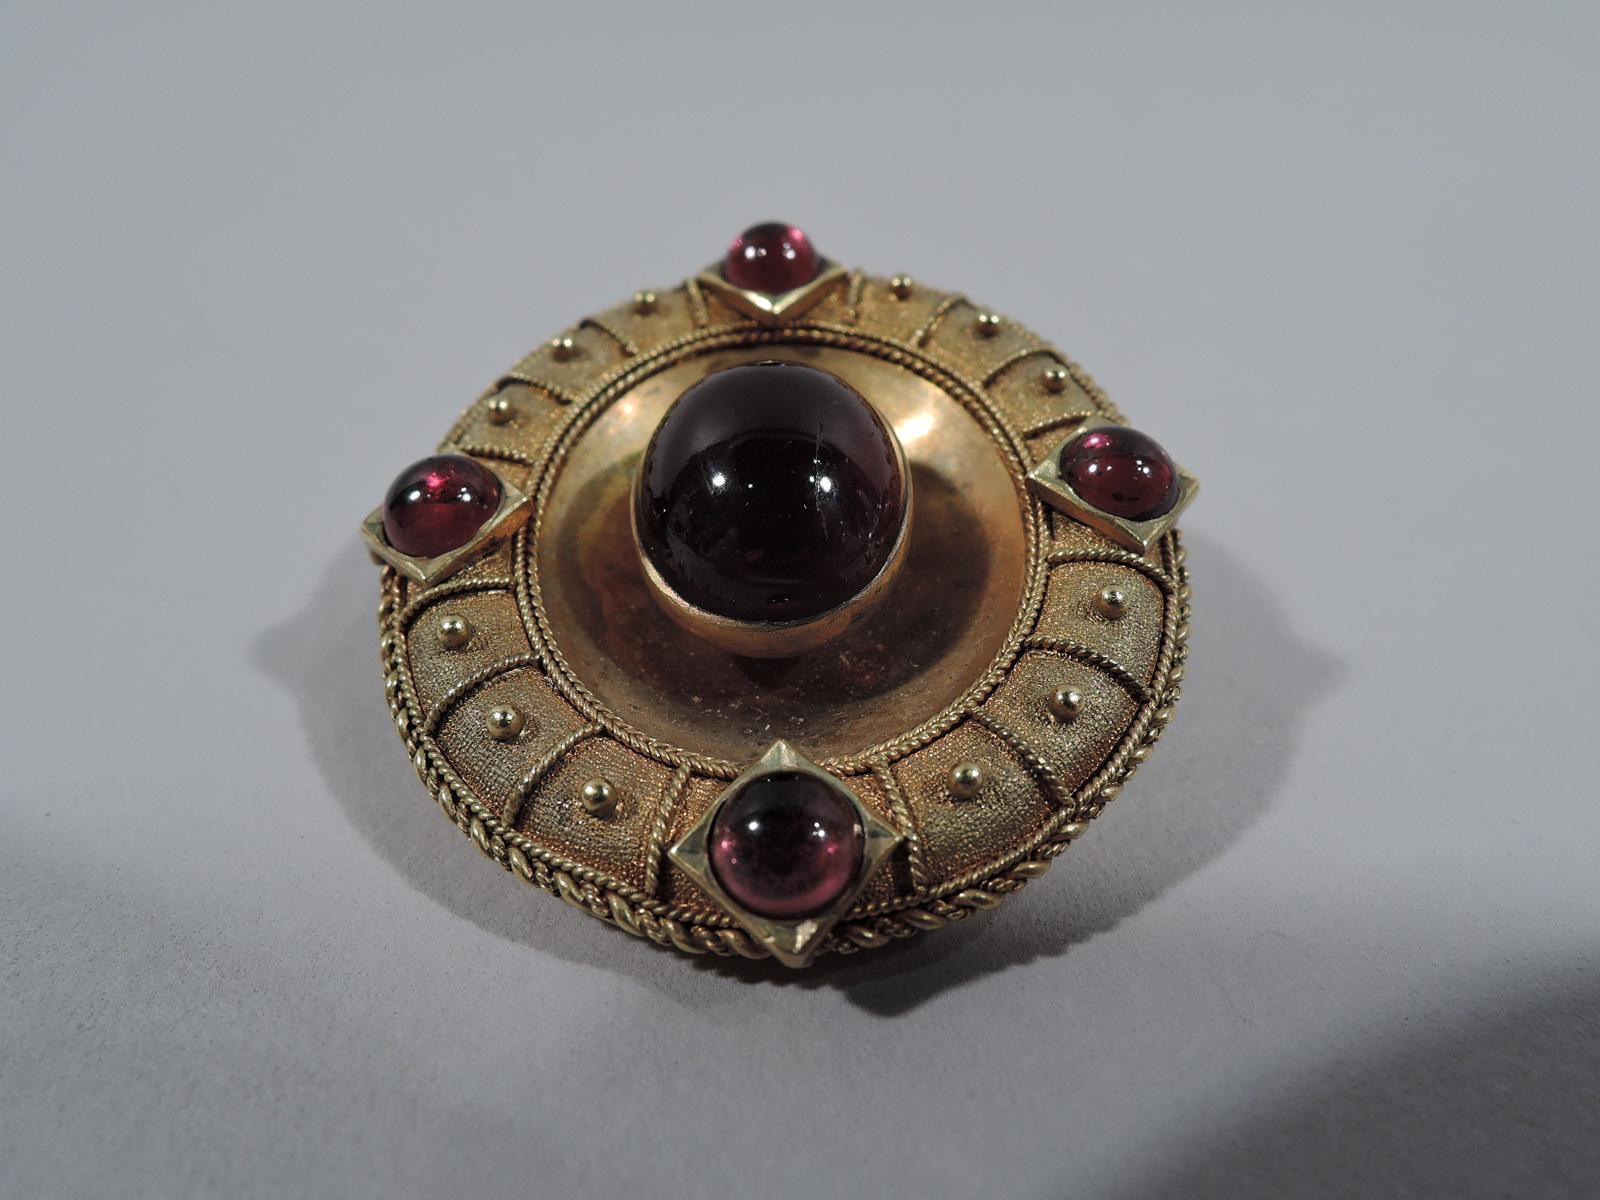 Etruscan Revival 18k gold and garnet brooch. Oval with large cabochon-cut garnet mounted to concave center. Four smaller cabochon-cut garnets mounted to shoulder, which is decorated with beaded rectilinear frames and rope rim. England, ca 1880.  